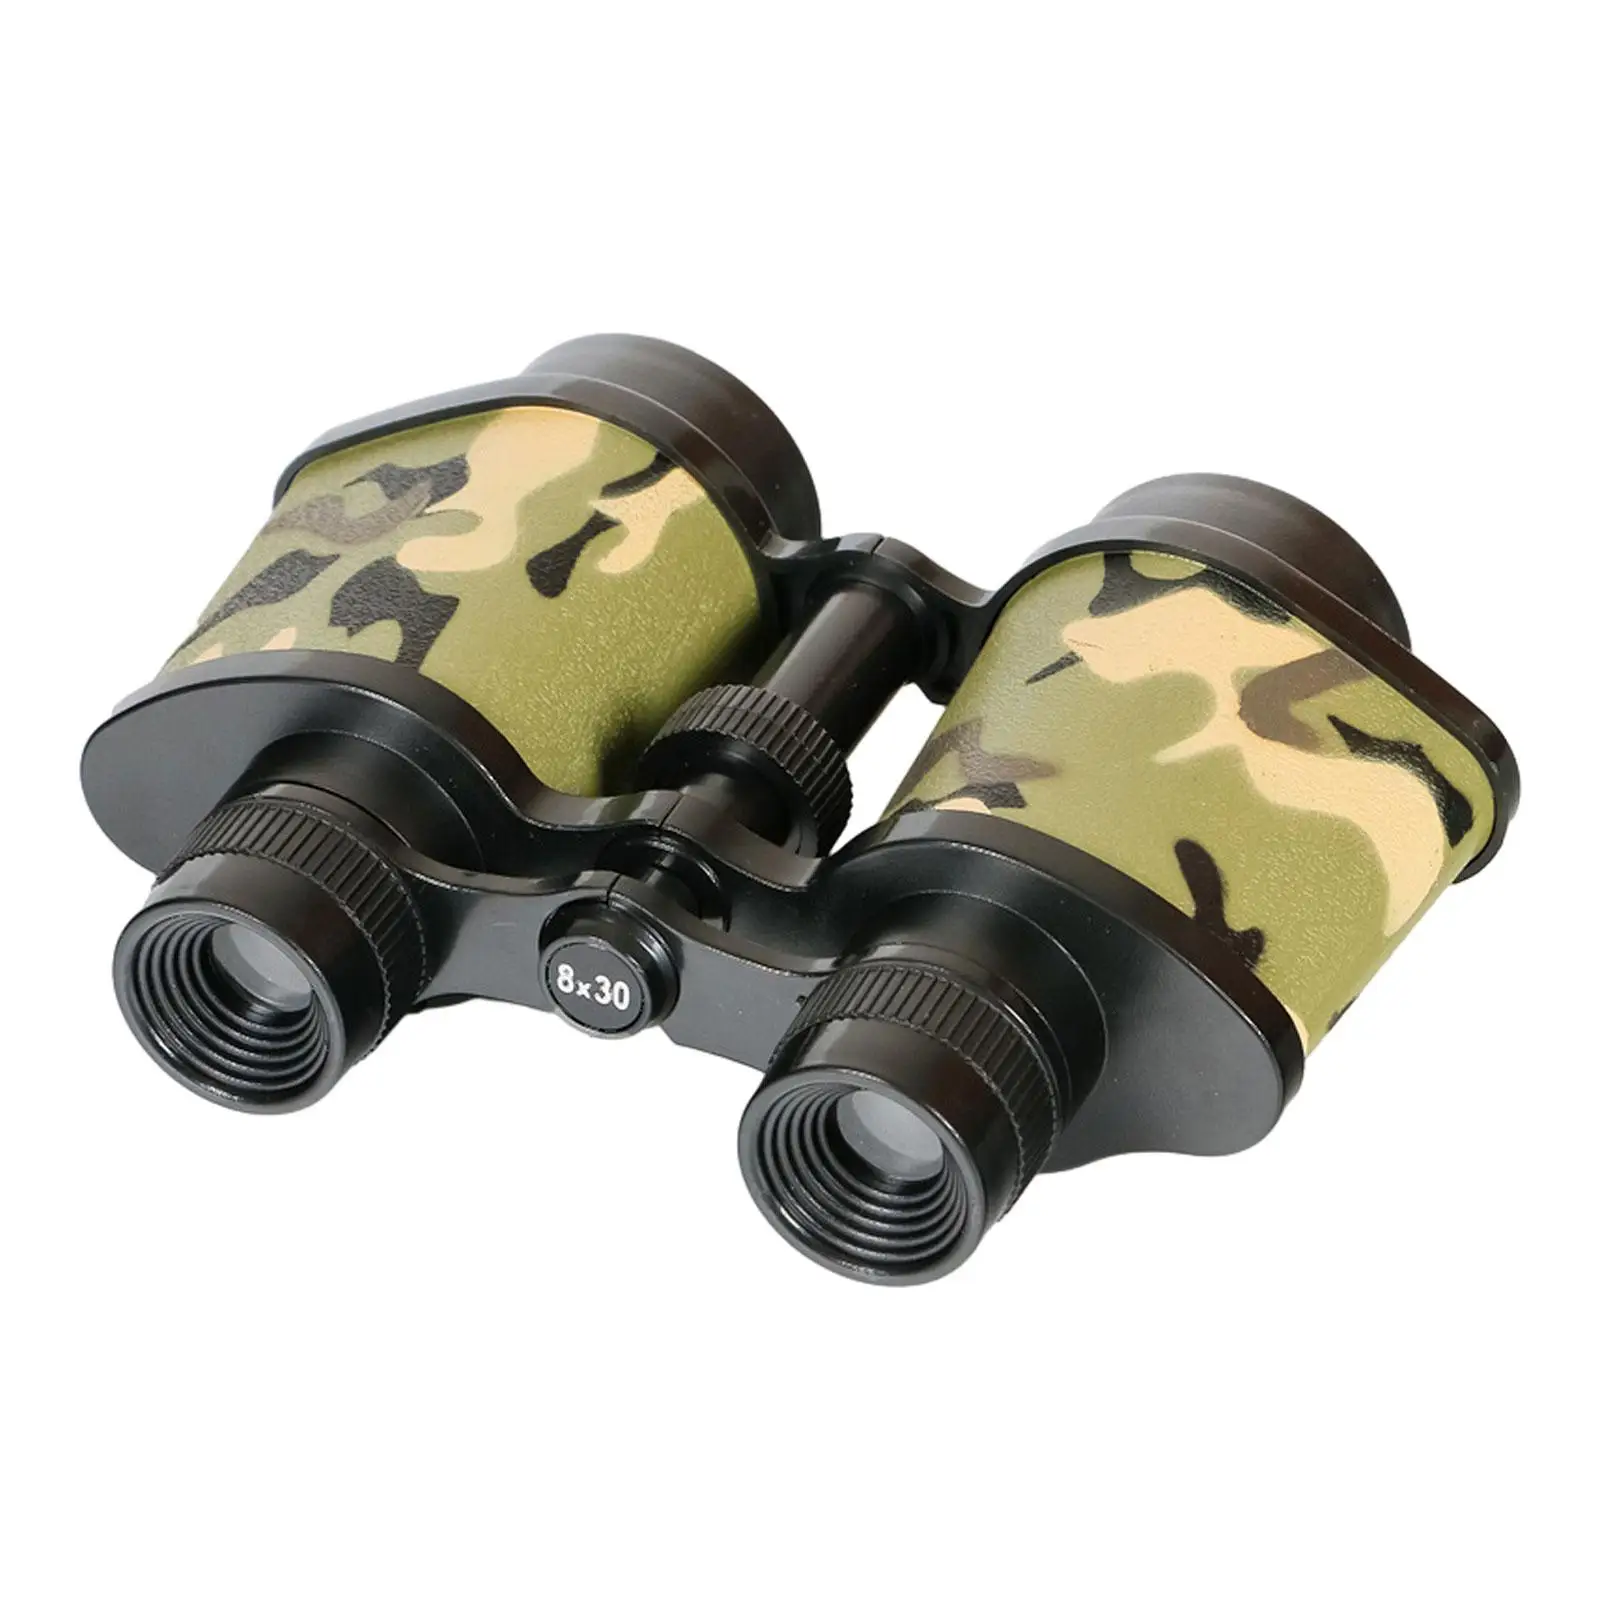 Kids Binoculars Toy 8x30 Educational Children Magnification Toy for Outdoor Activity Party Favors Insights Presents Exploration